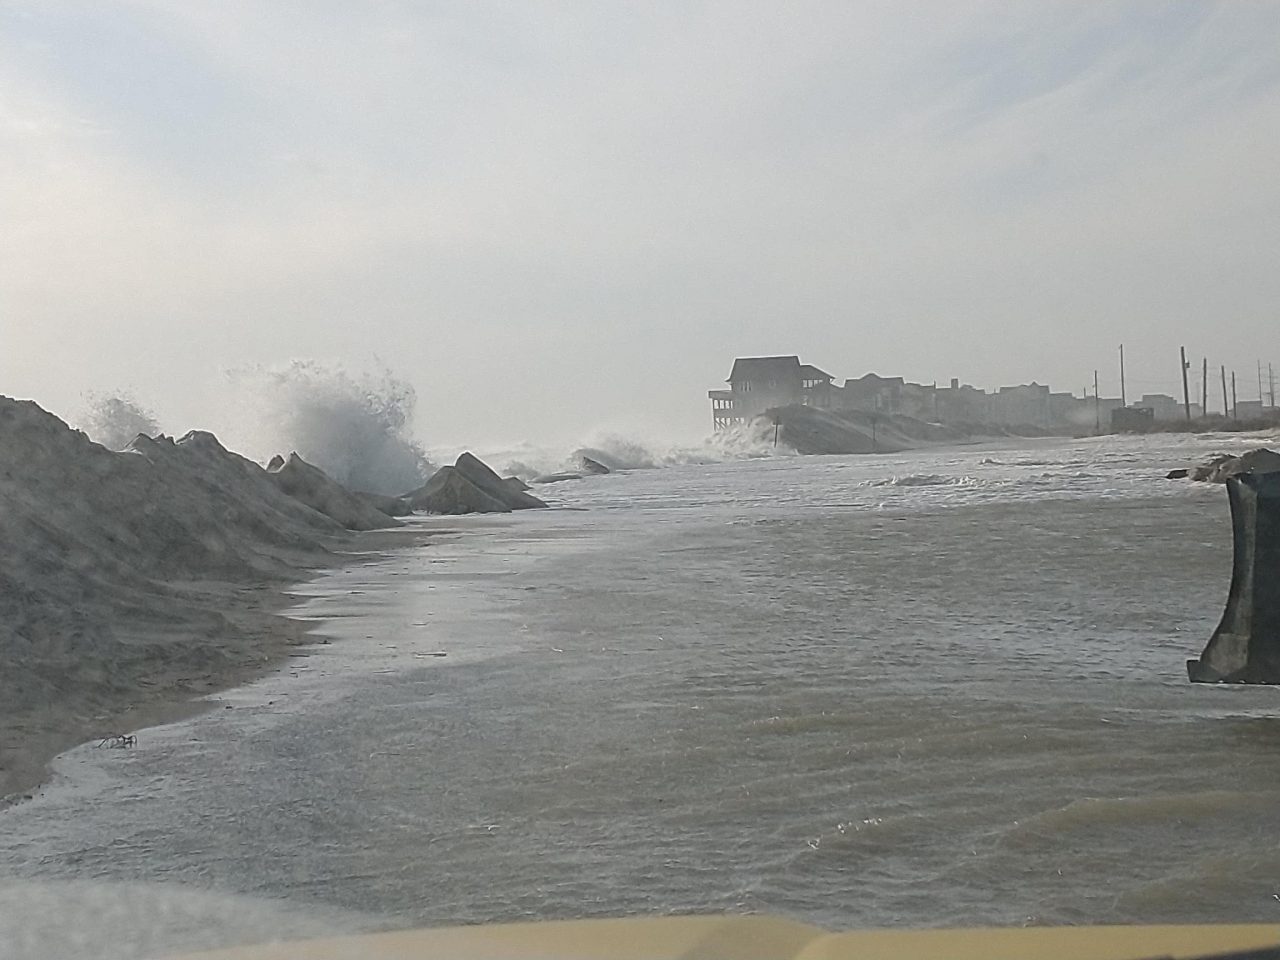  Conditions are shown Monday at the S-Turns on N.C. 12 north of Rodanthe.  Photo: NCDOT